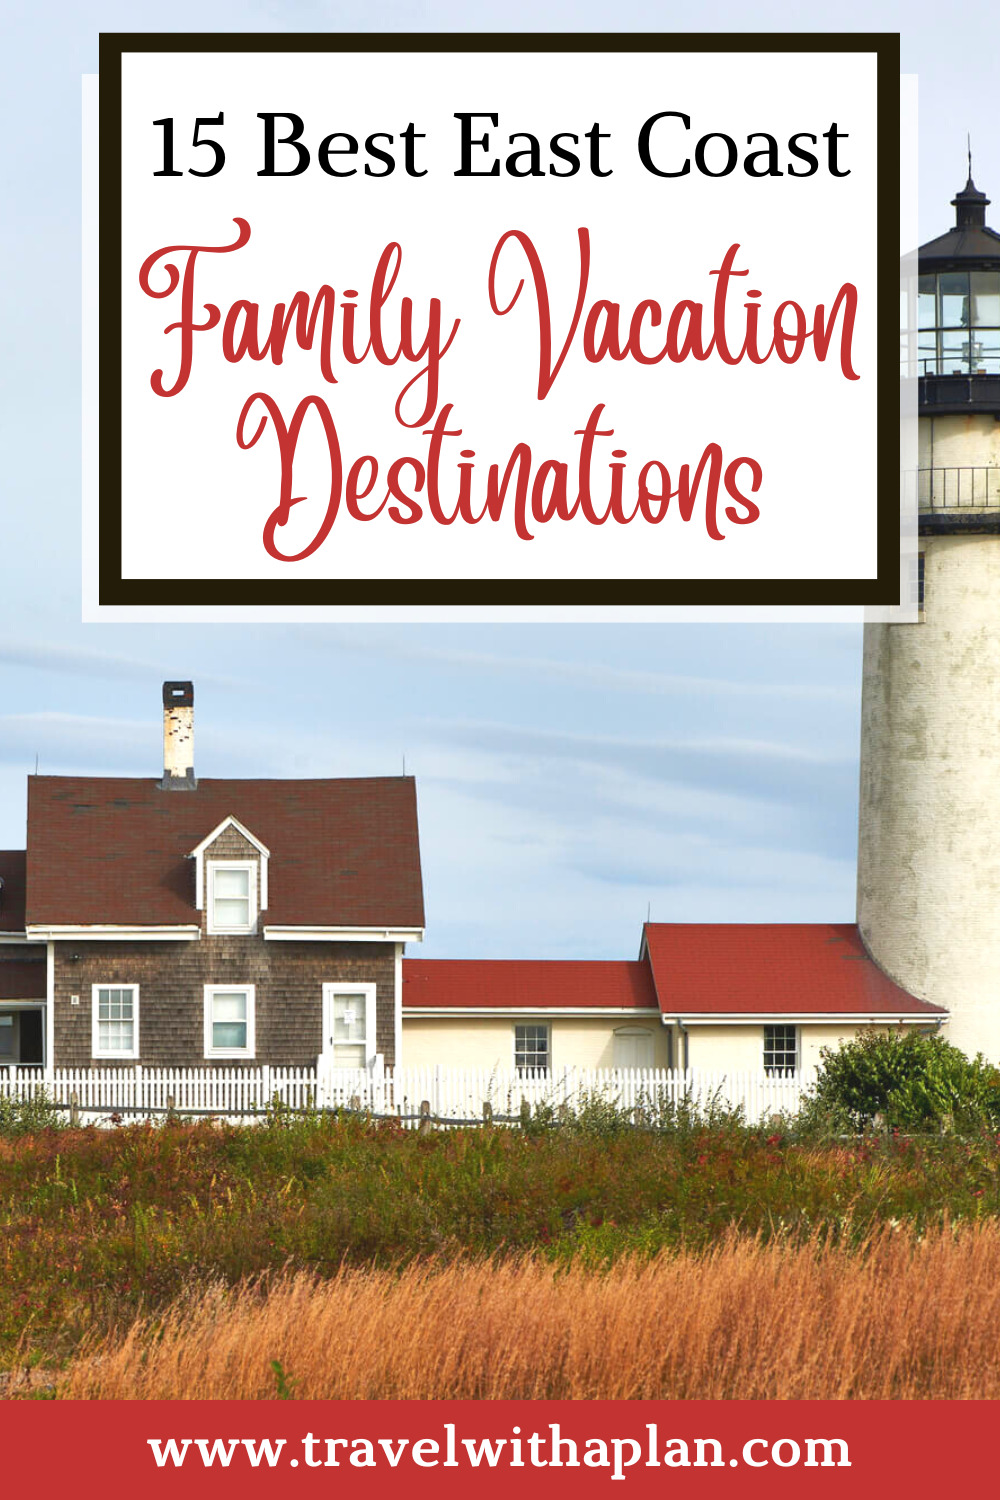 Check out our list of the best East Coast family vacation spots from top U.S. family travel blog, Travel With A Plan!